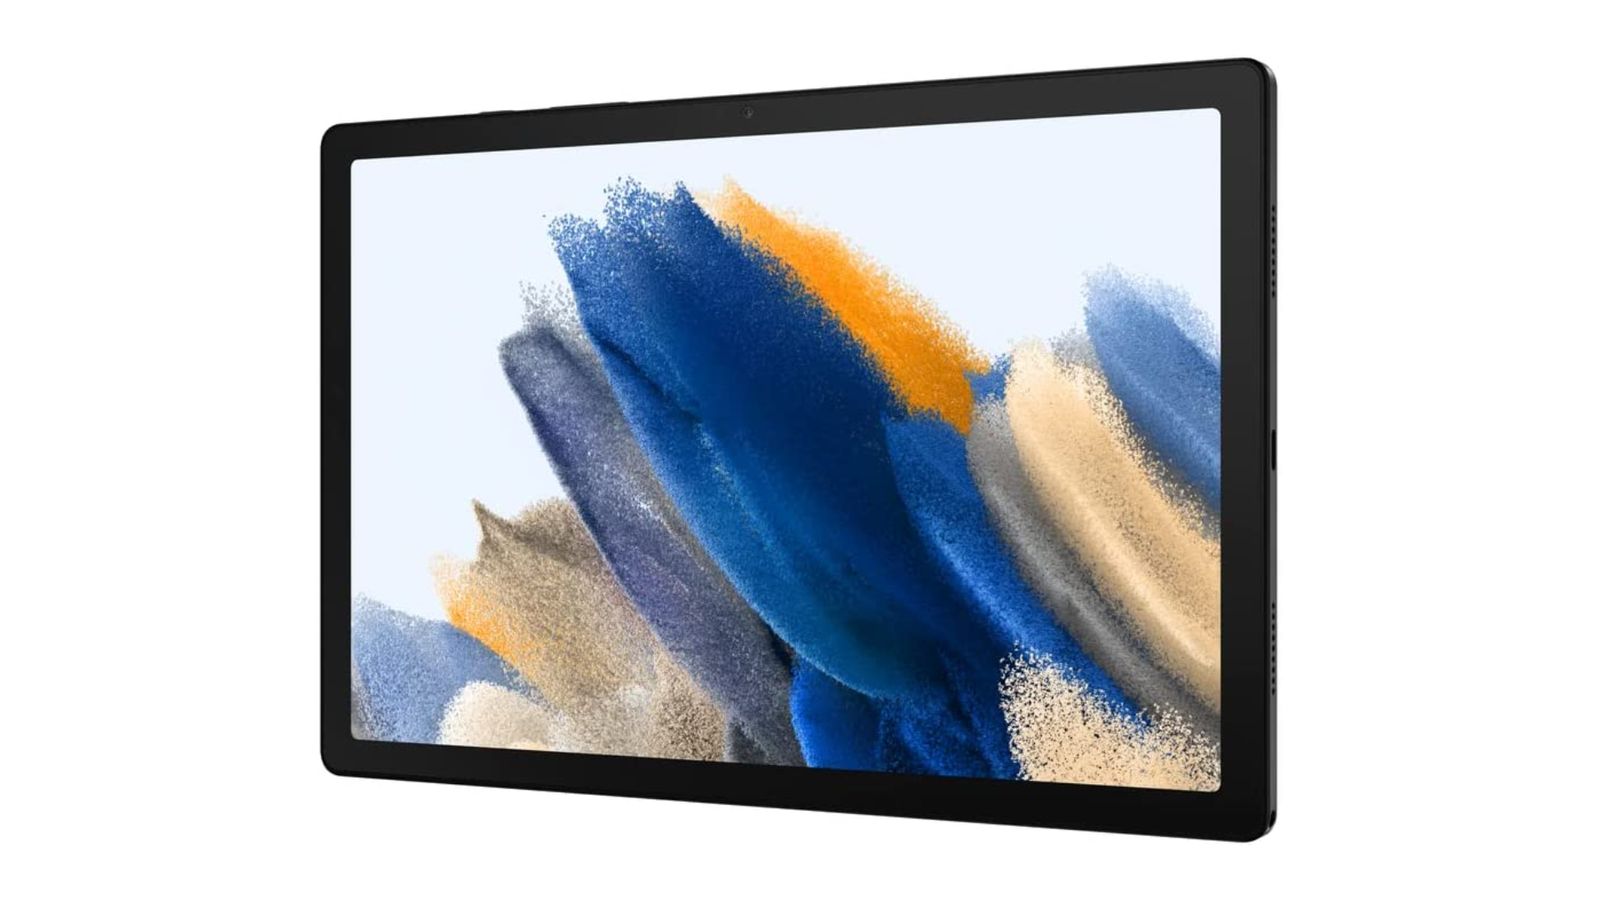 Best tech gift ideas - Samsung product image of a black and grey tablet.